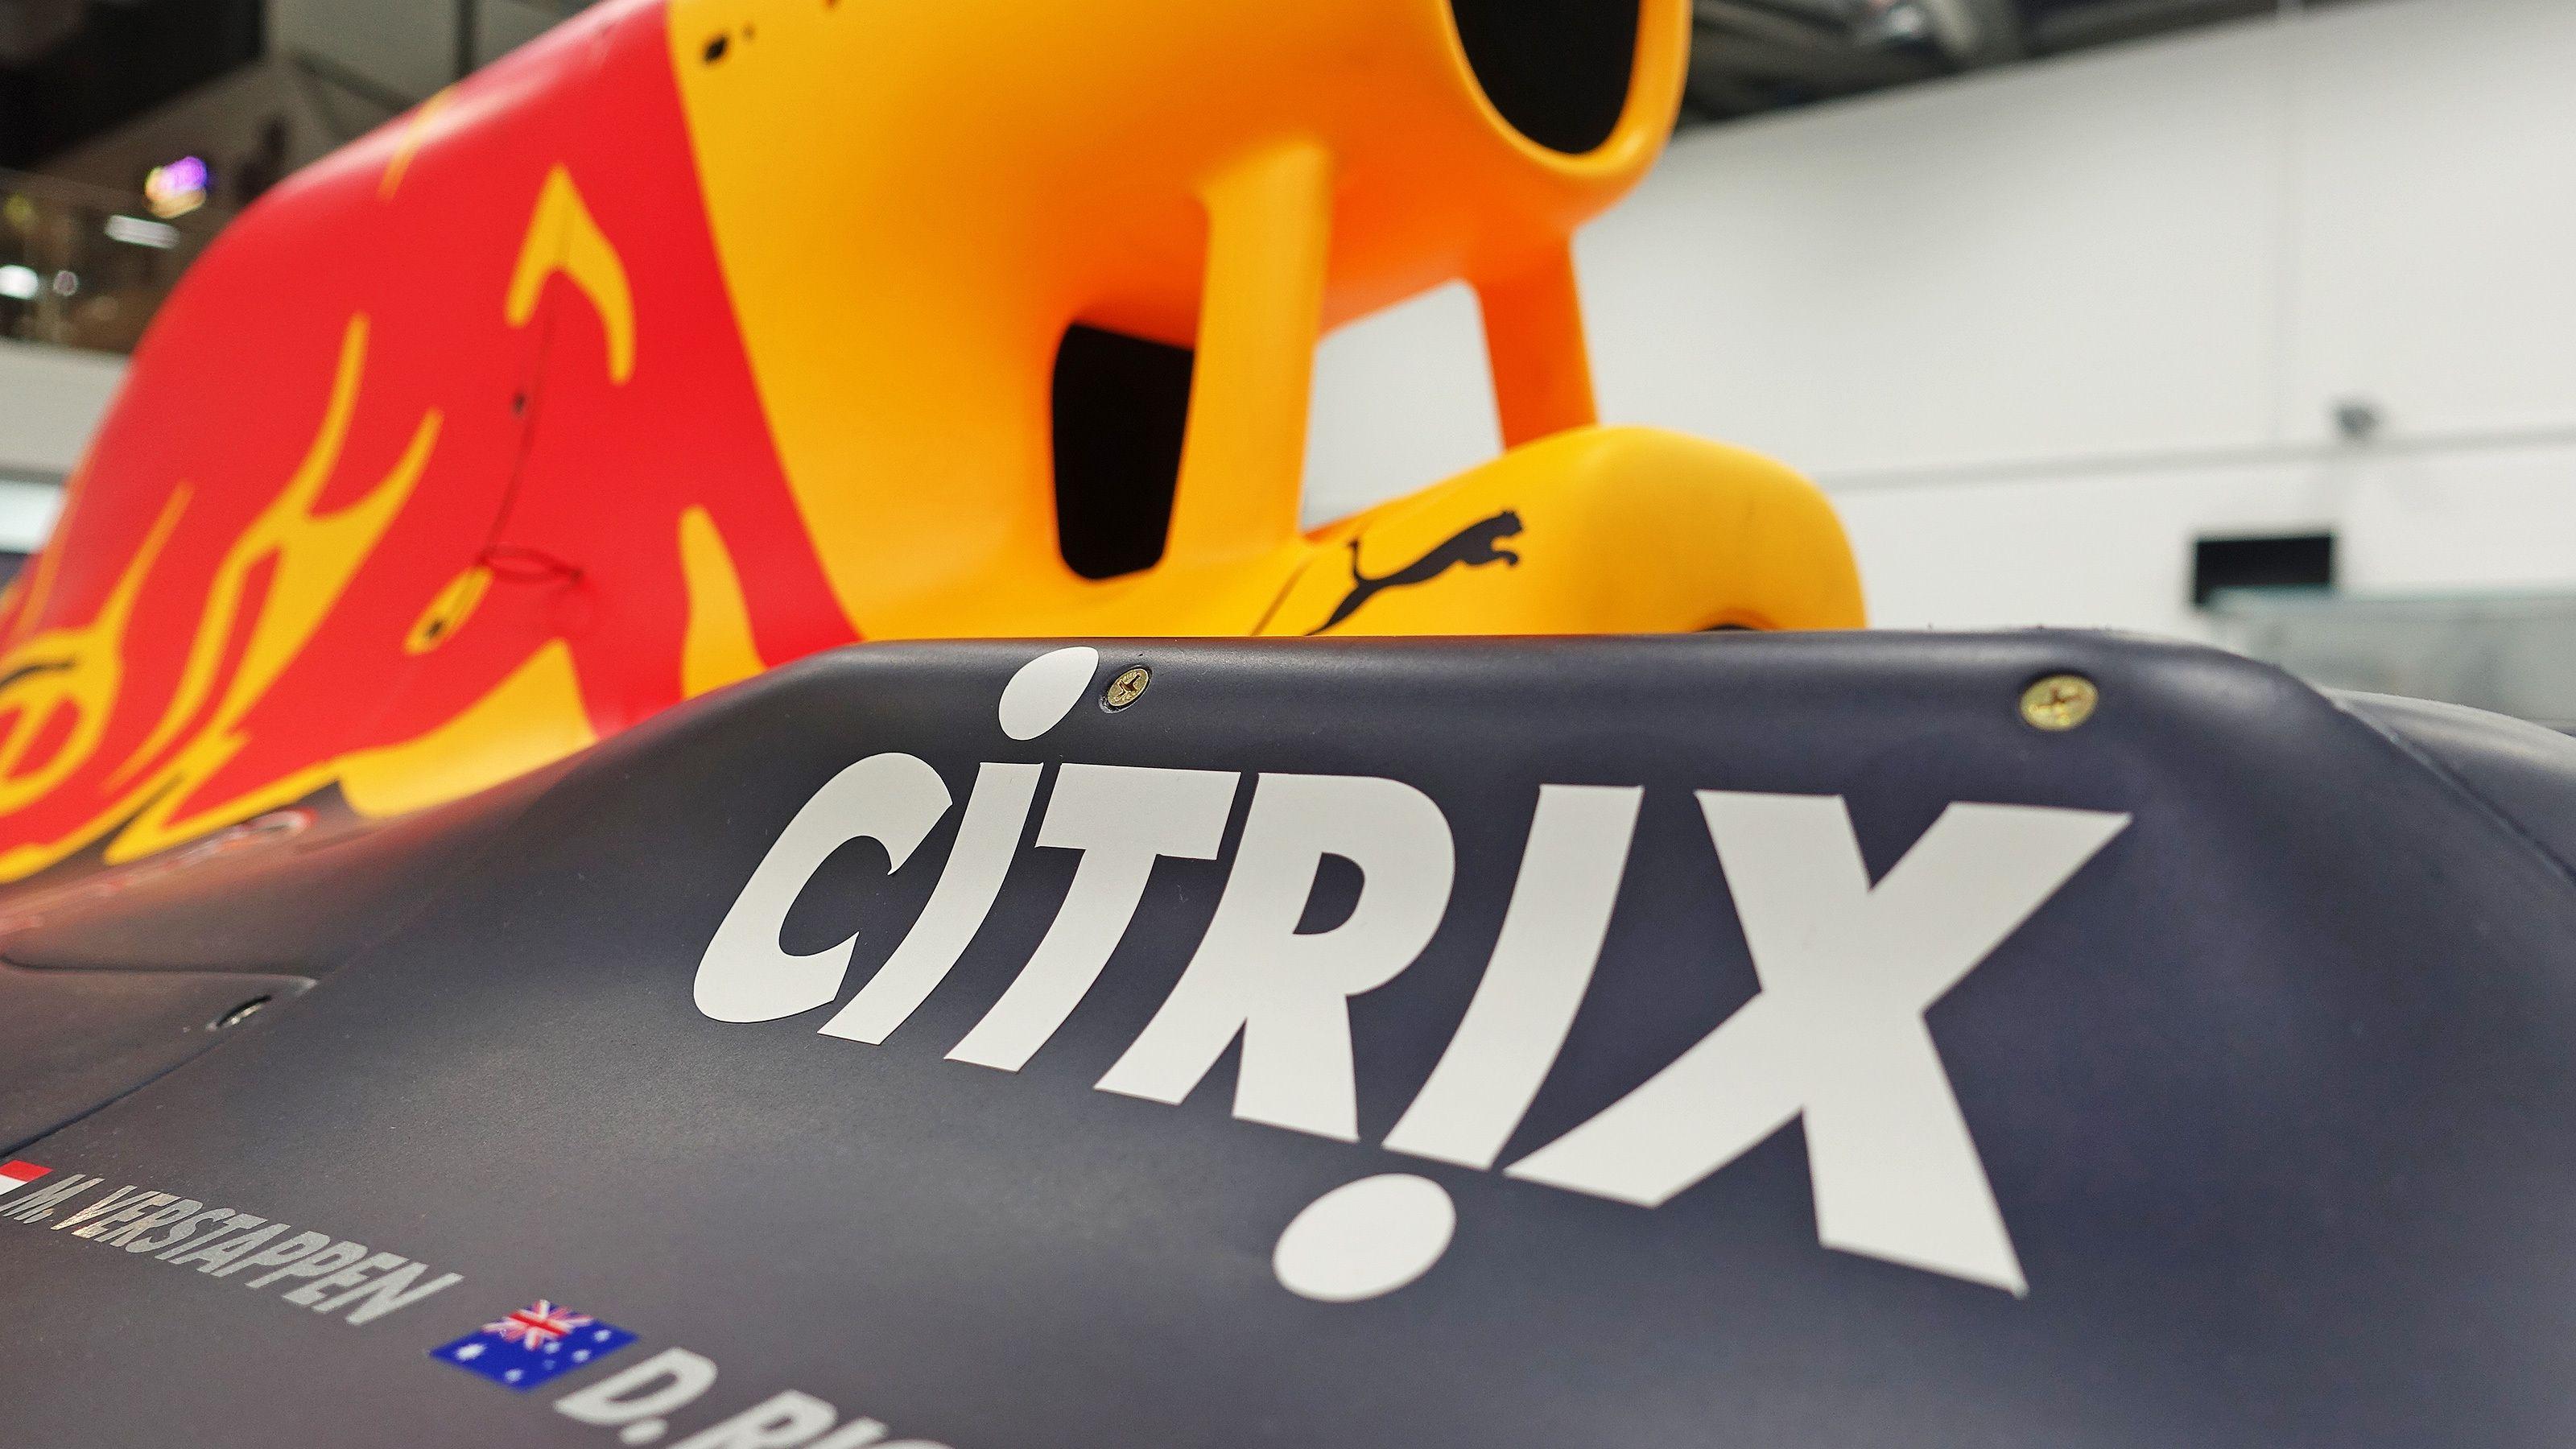 Citrix Logo - Citrix to Become Red Bull Racing Innovation Partner